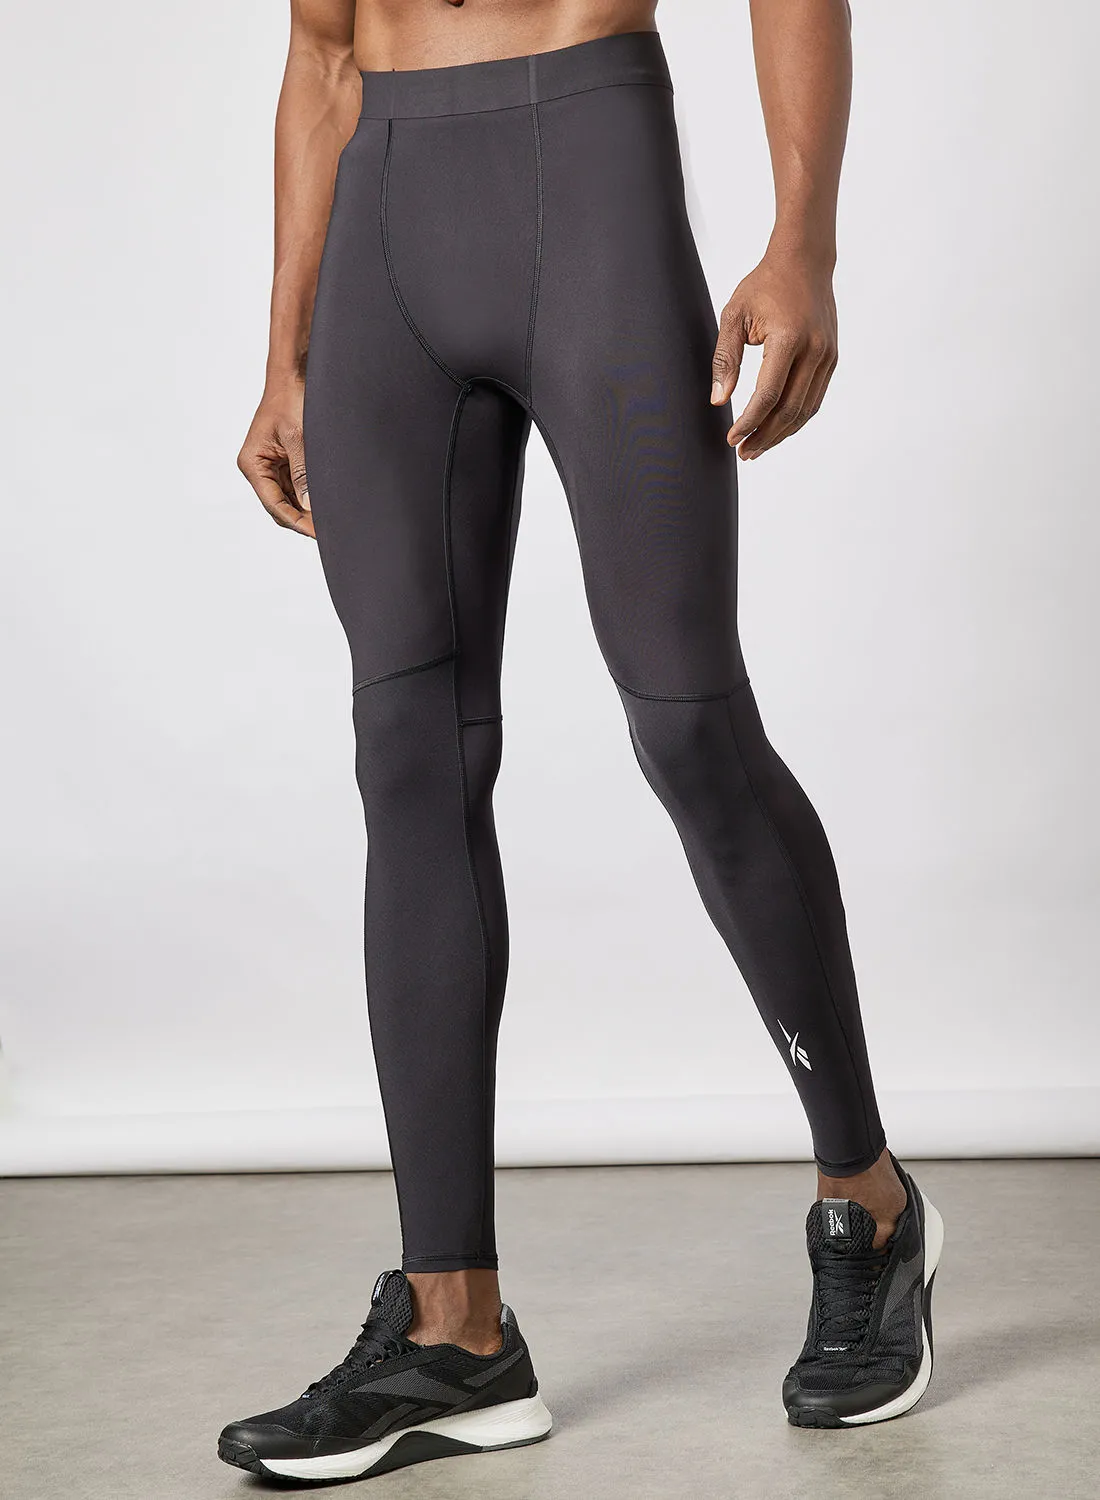 Reebok United By Fitness Compression Tights Black